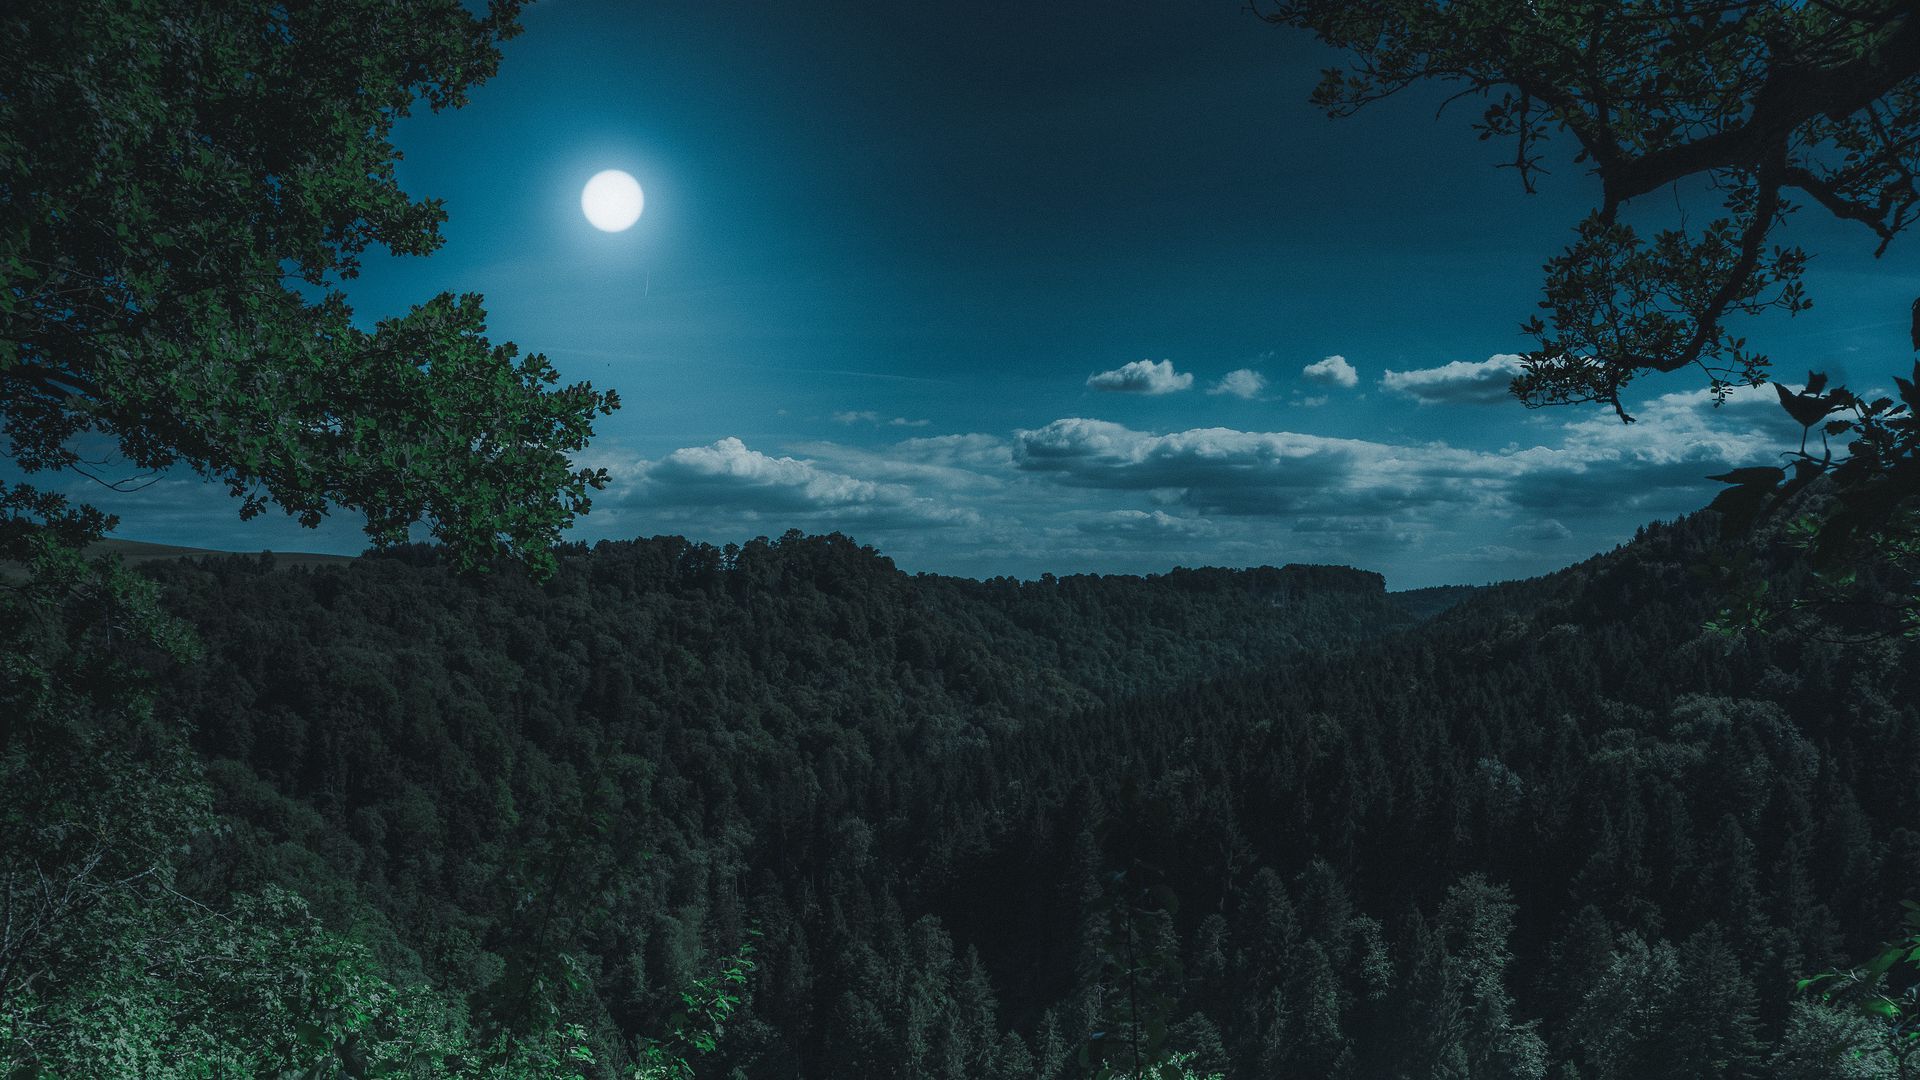 Download wallpaper 1920x1080 forest, mountains, moon, clouds full